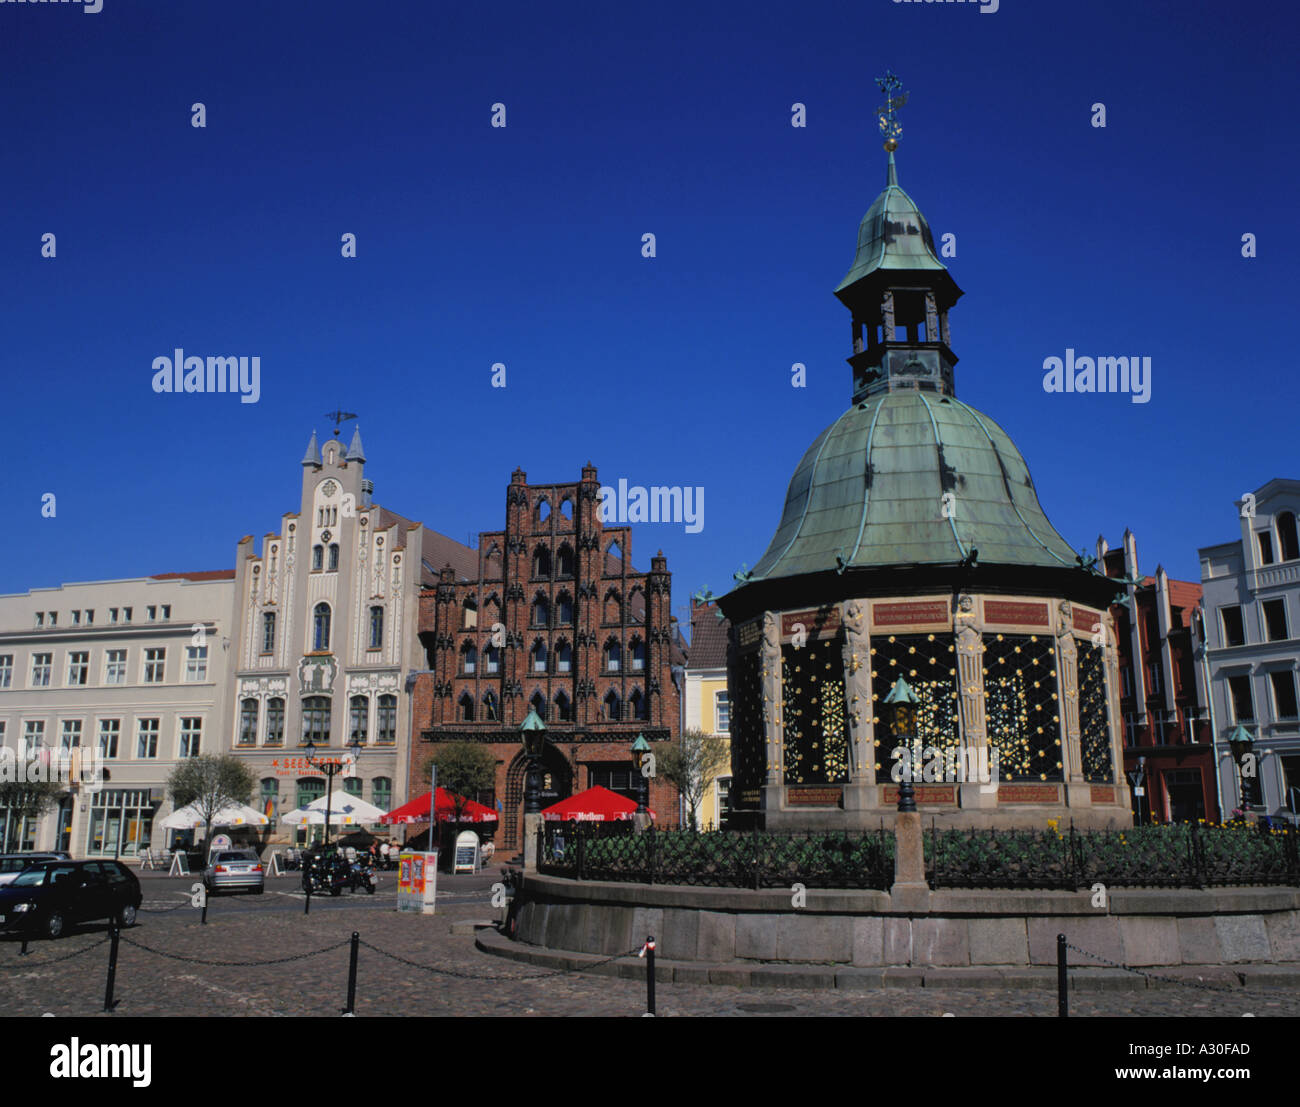 Dutch Waterworks High Resolution Stock Photography and Images - Alamy